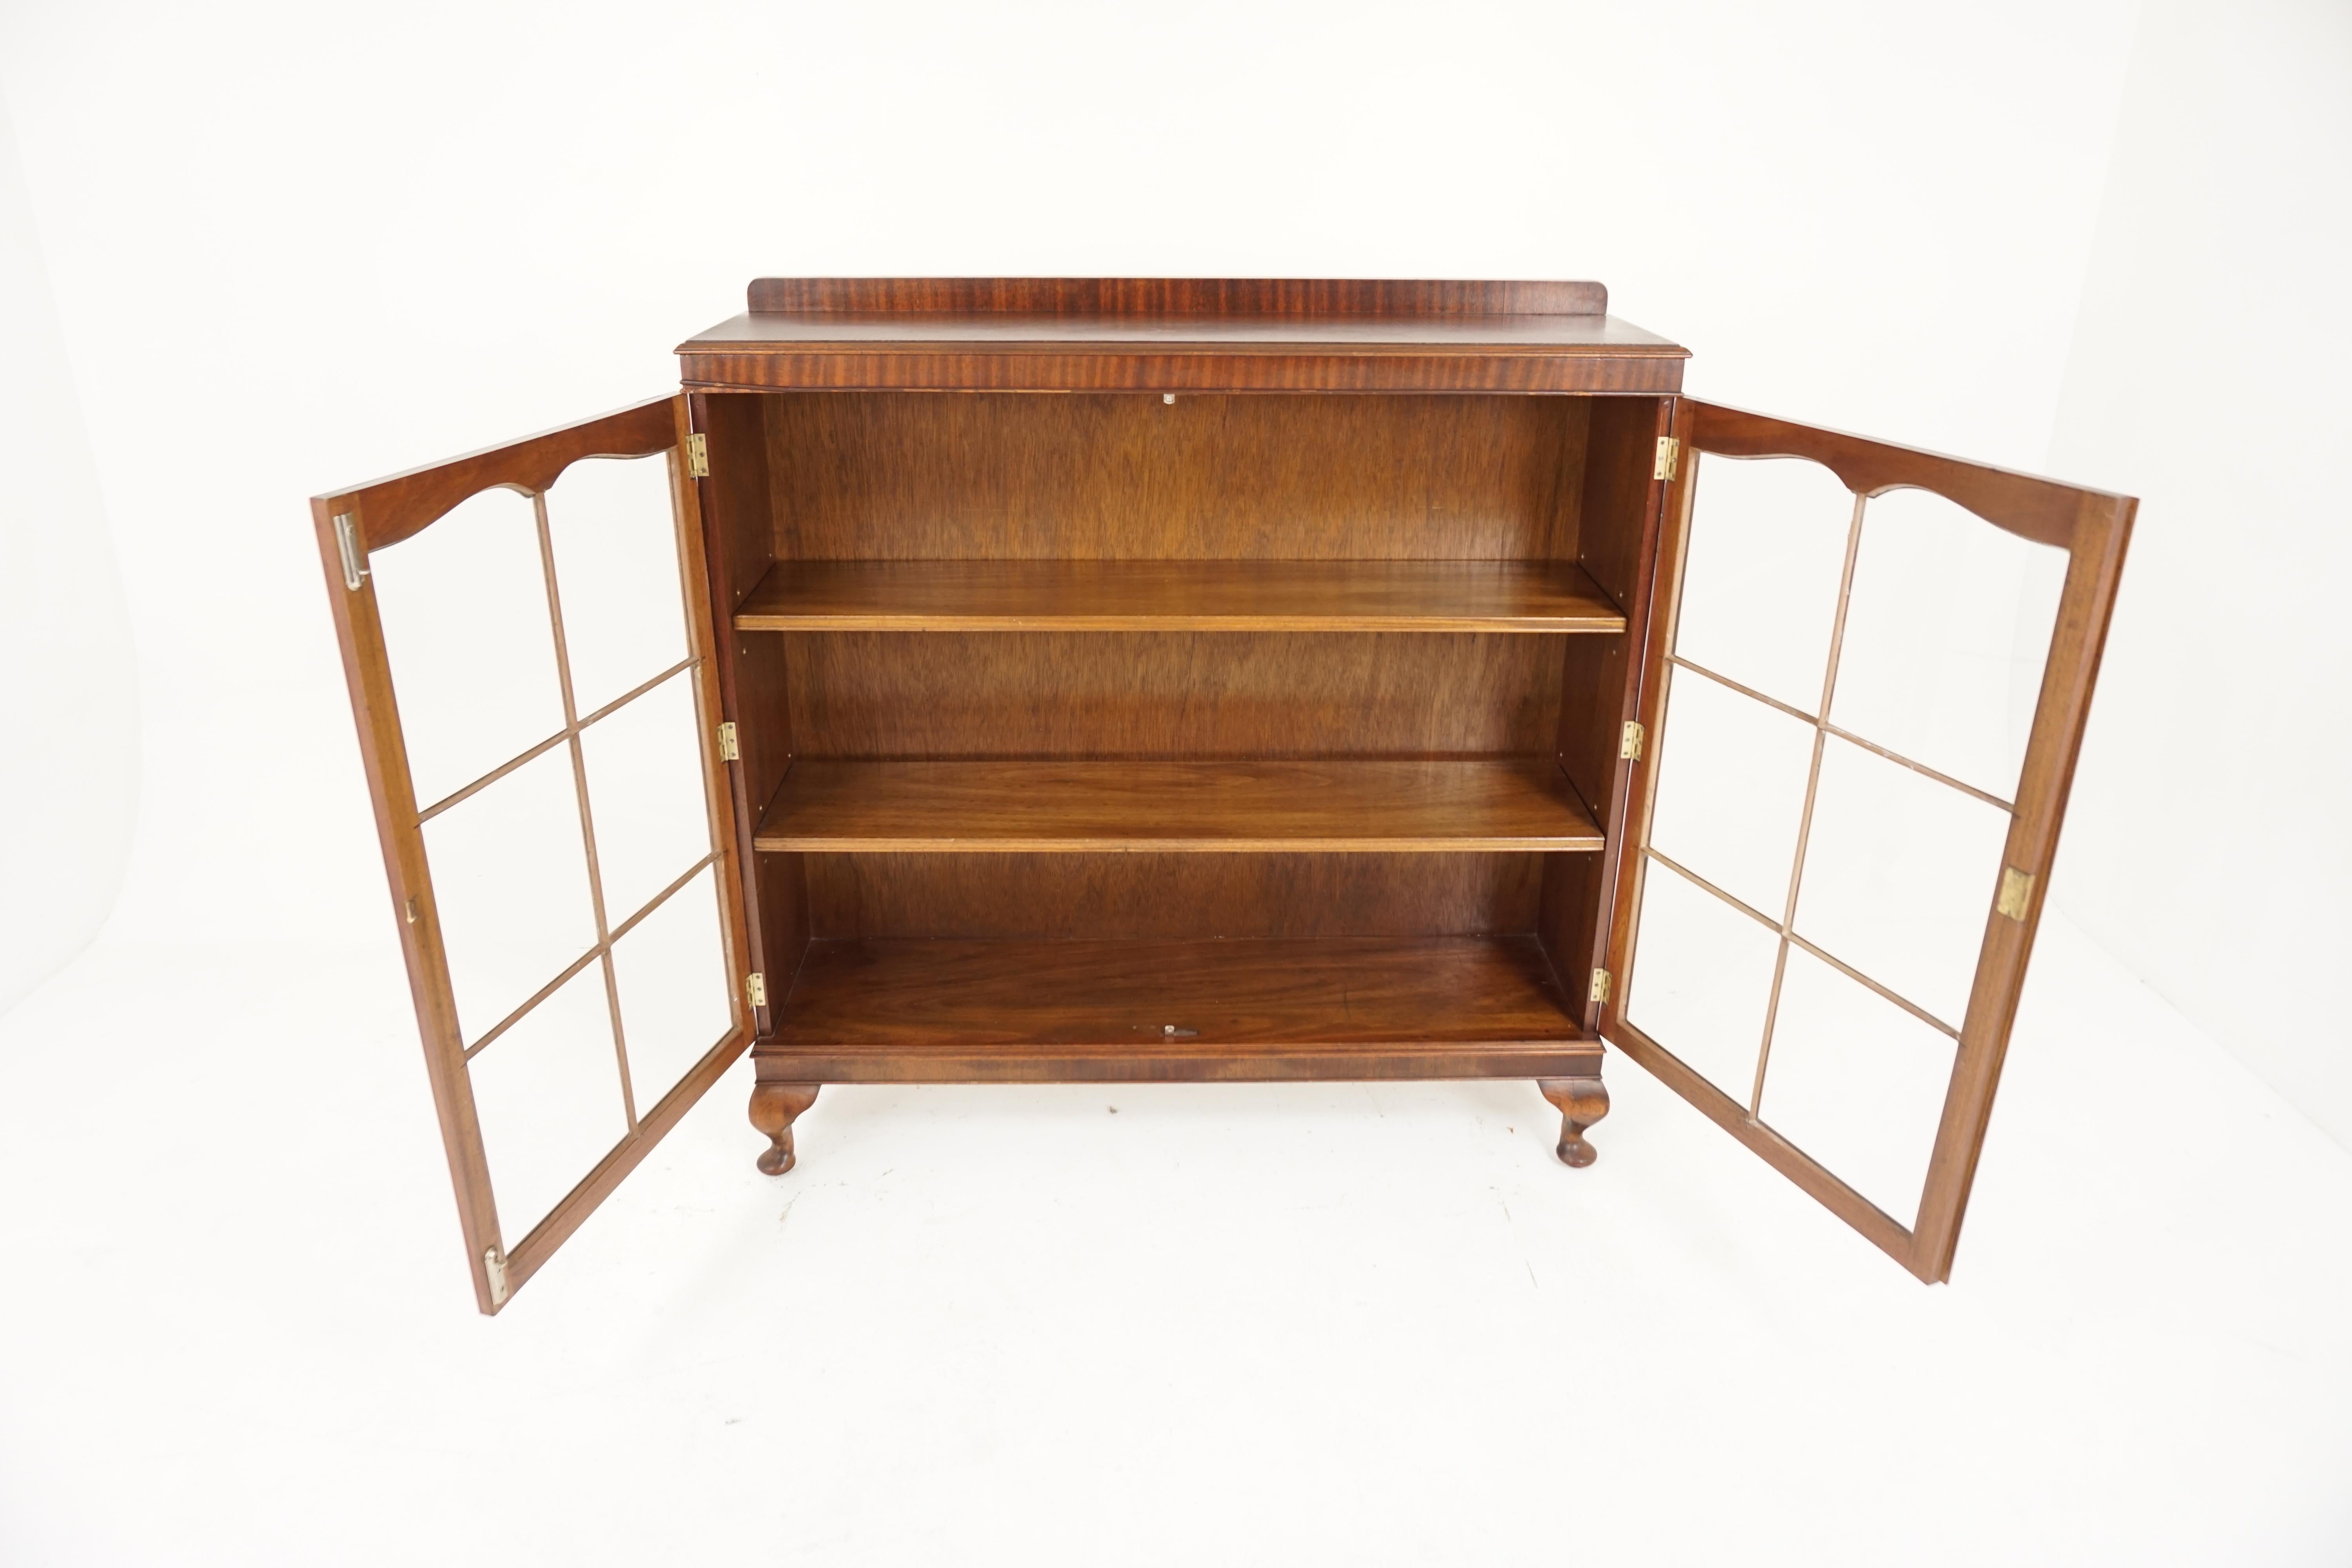 Vintage walnut two-door bookcase, display cabinet, Scotland 1930, B1406

Scotland, 1930
Solid walnut and veneers
Original finish
Rectangular top with small pediment to the back
Pair of original glass doors with twelve panes
Open to reveal two